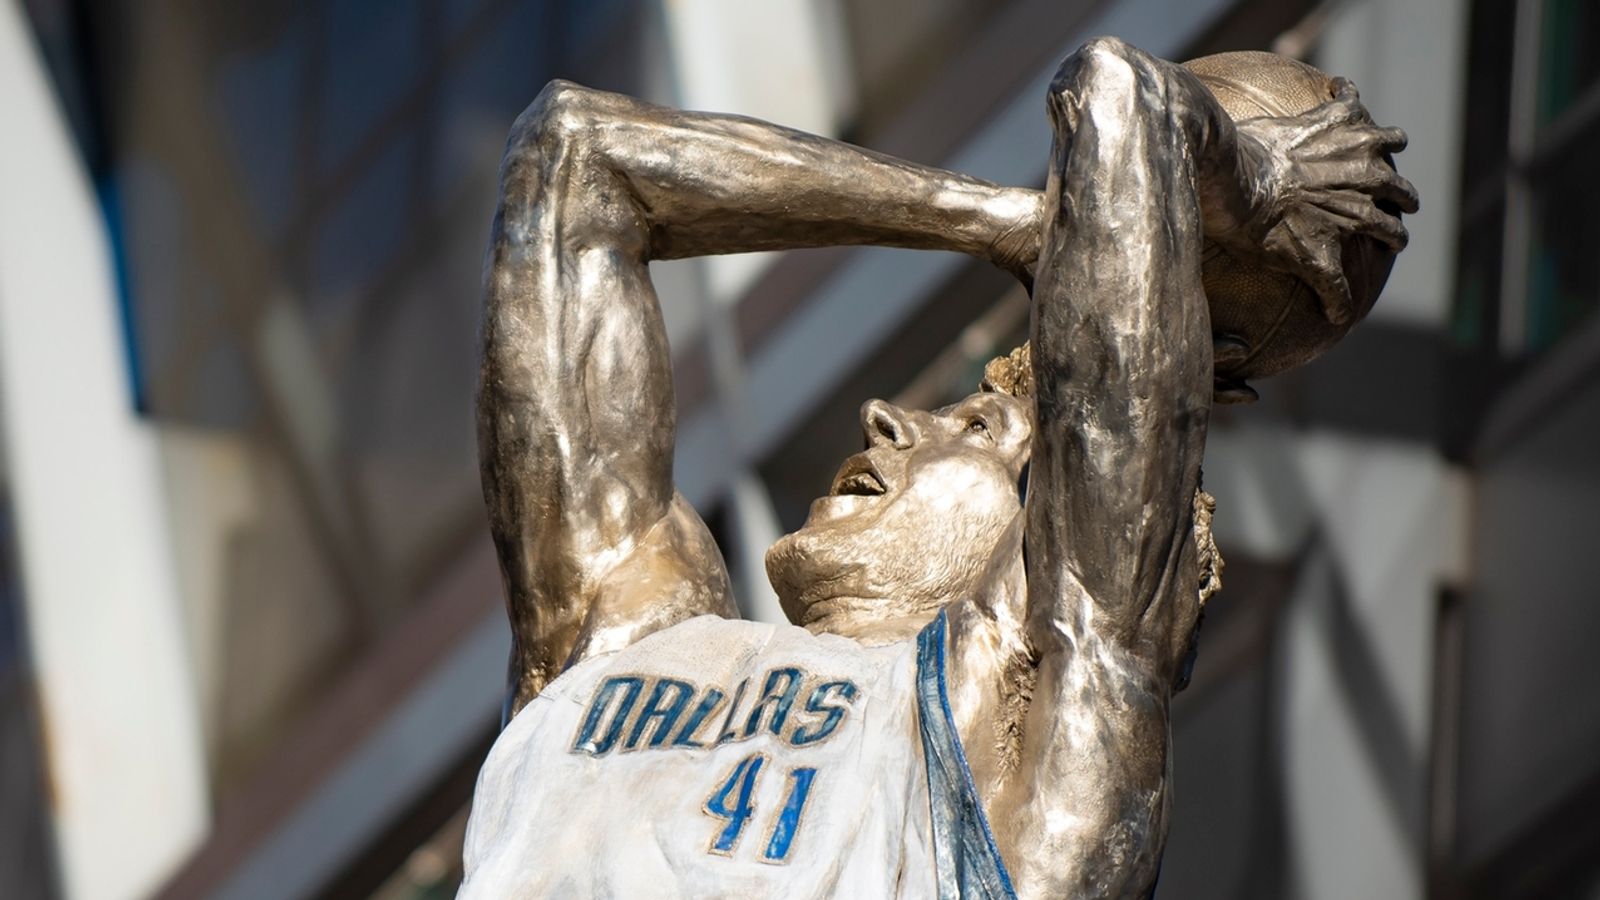 Nowitzki statue unveiled in Dallas: “She looks incredible”